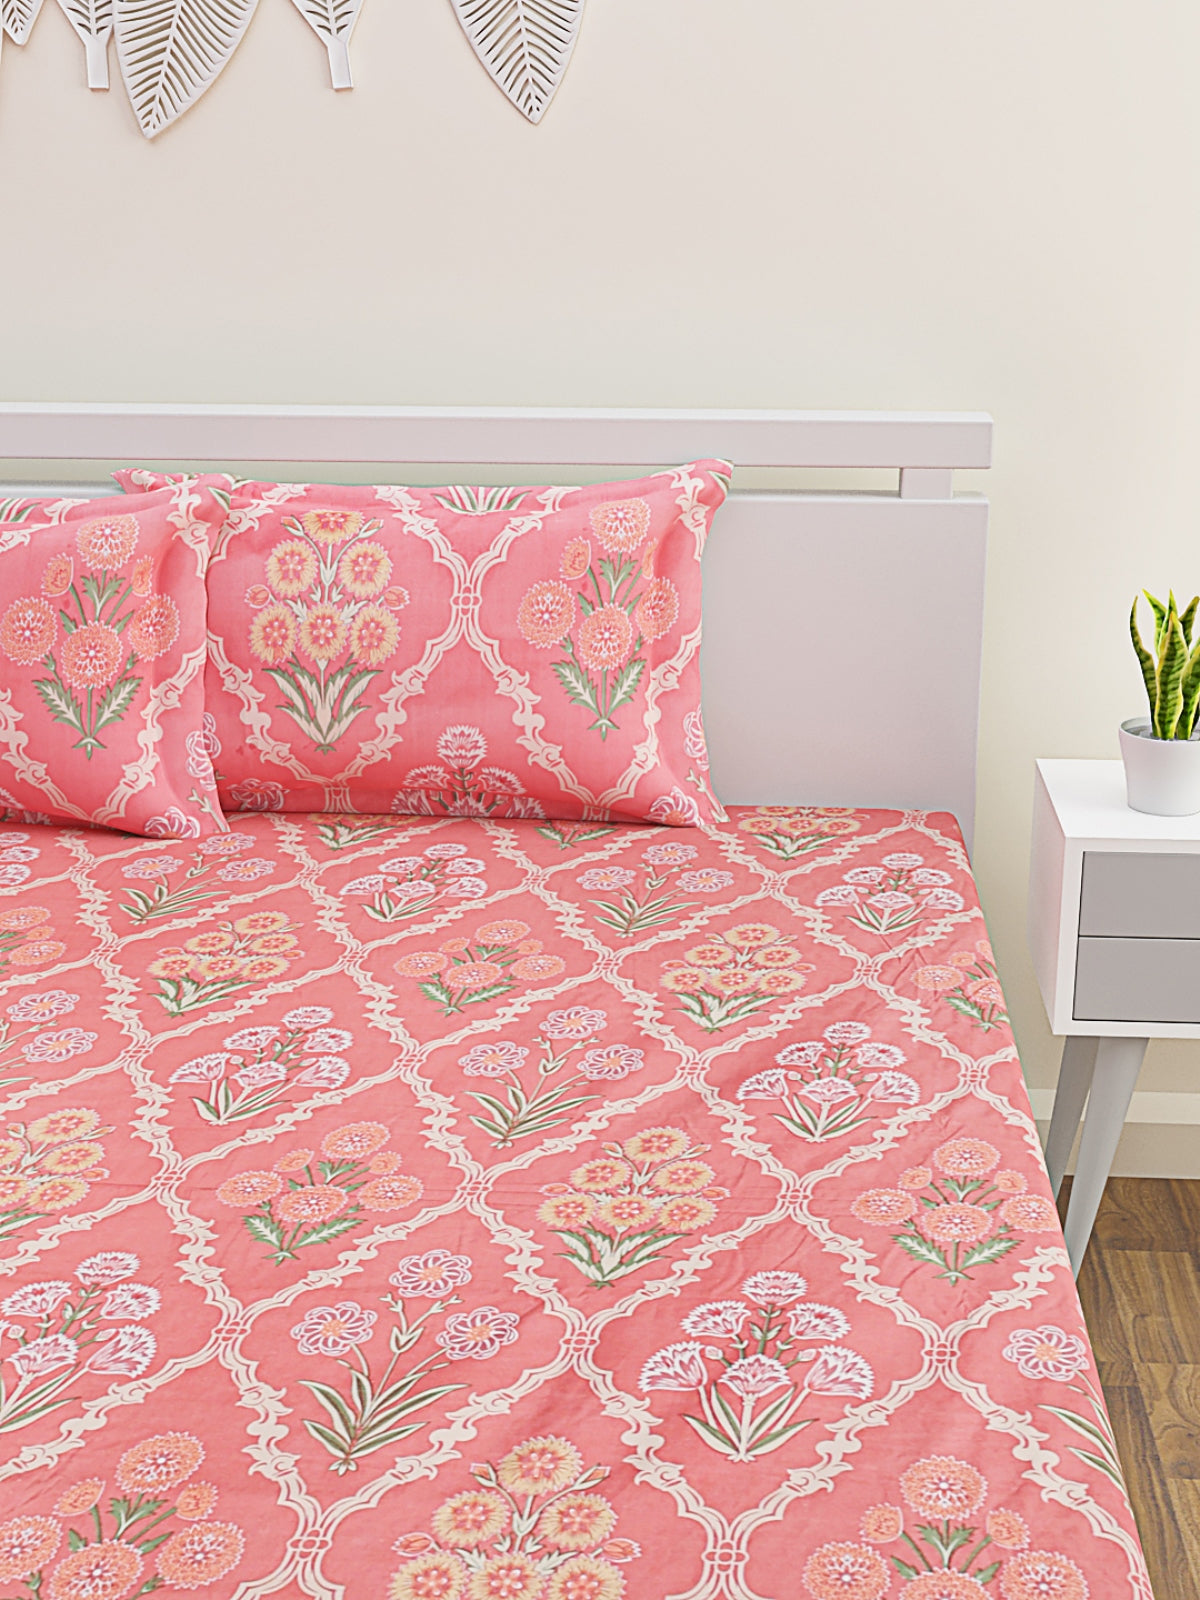 Pink Floral Patterned 300 TC King Fitted Bedsheet with 2 Pillow Covers